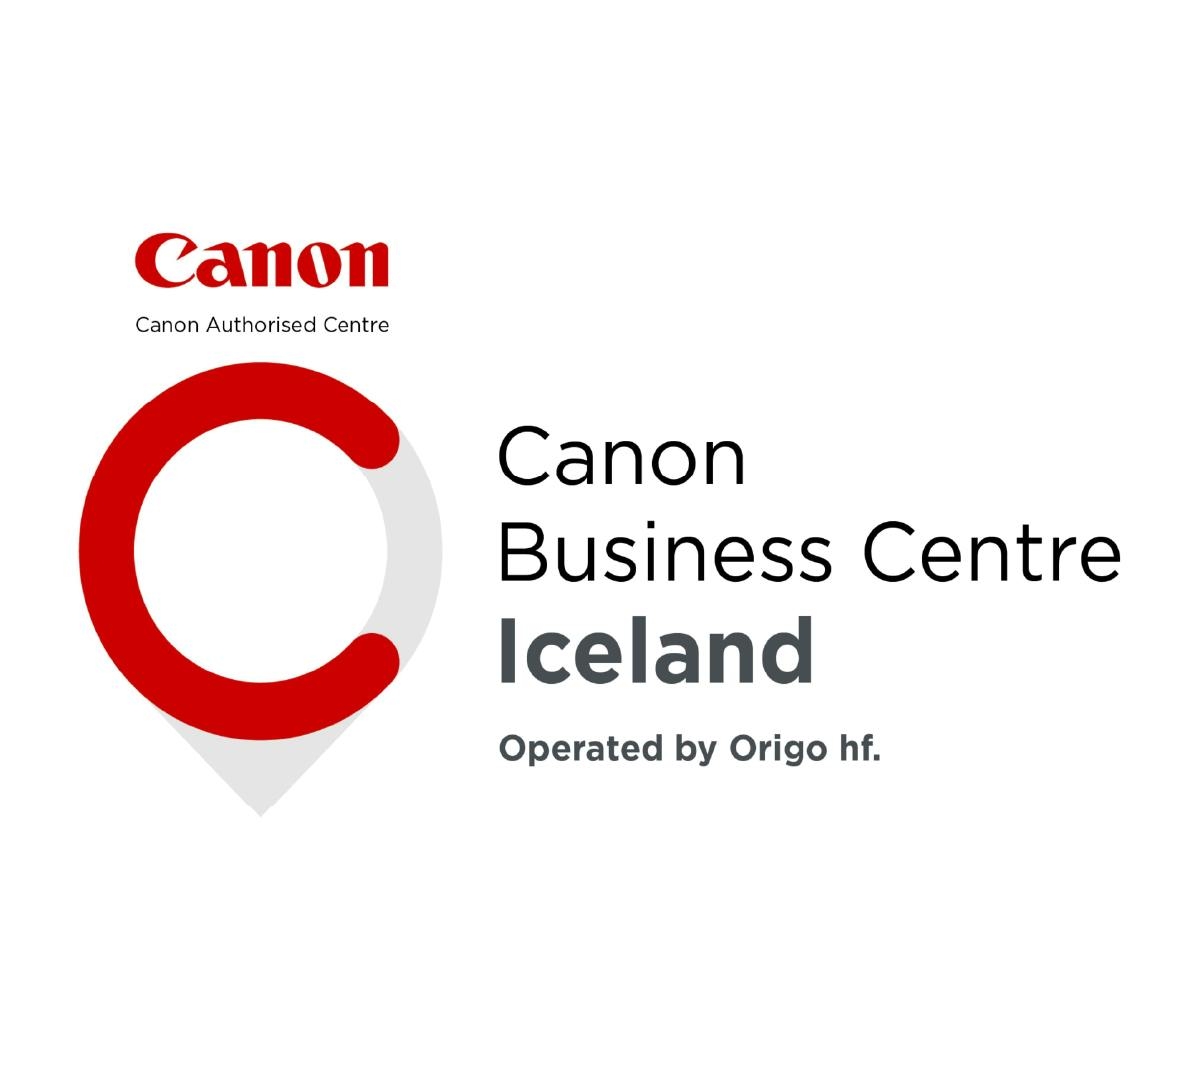 Canon Business Centre Iceland